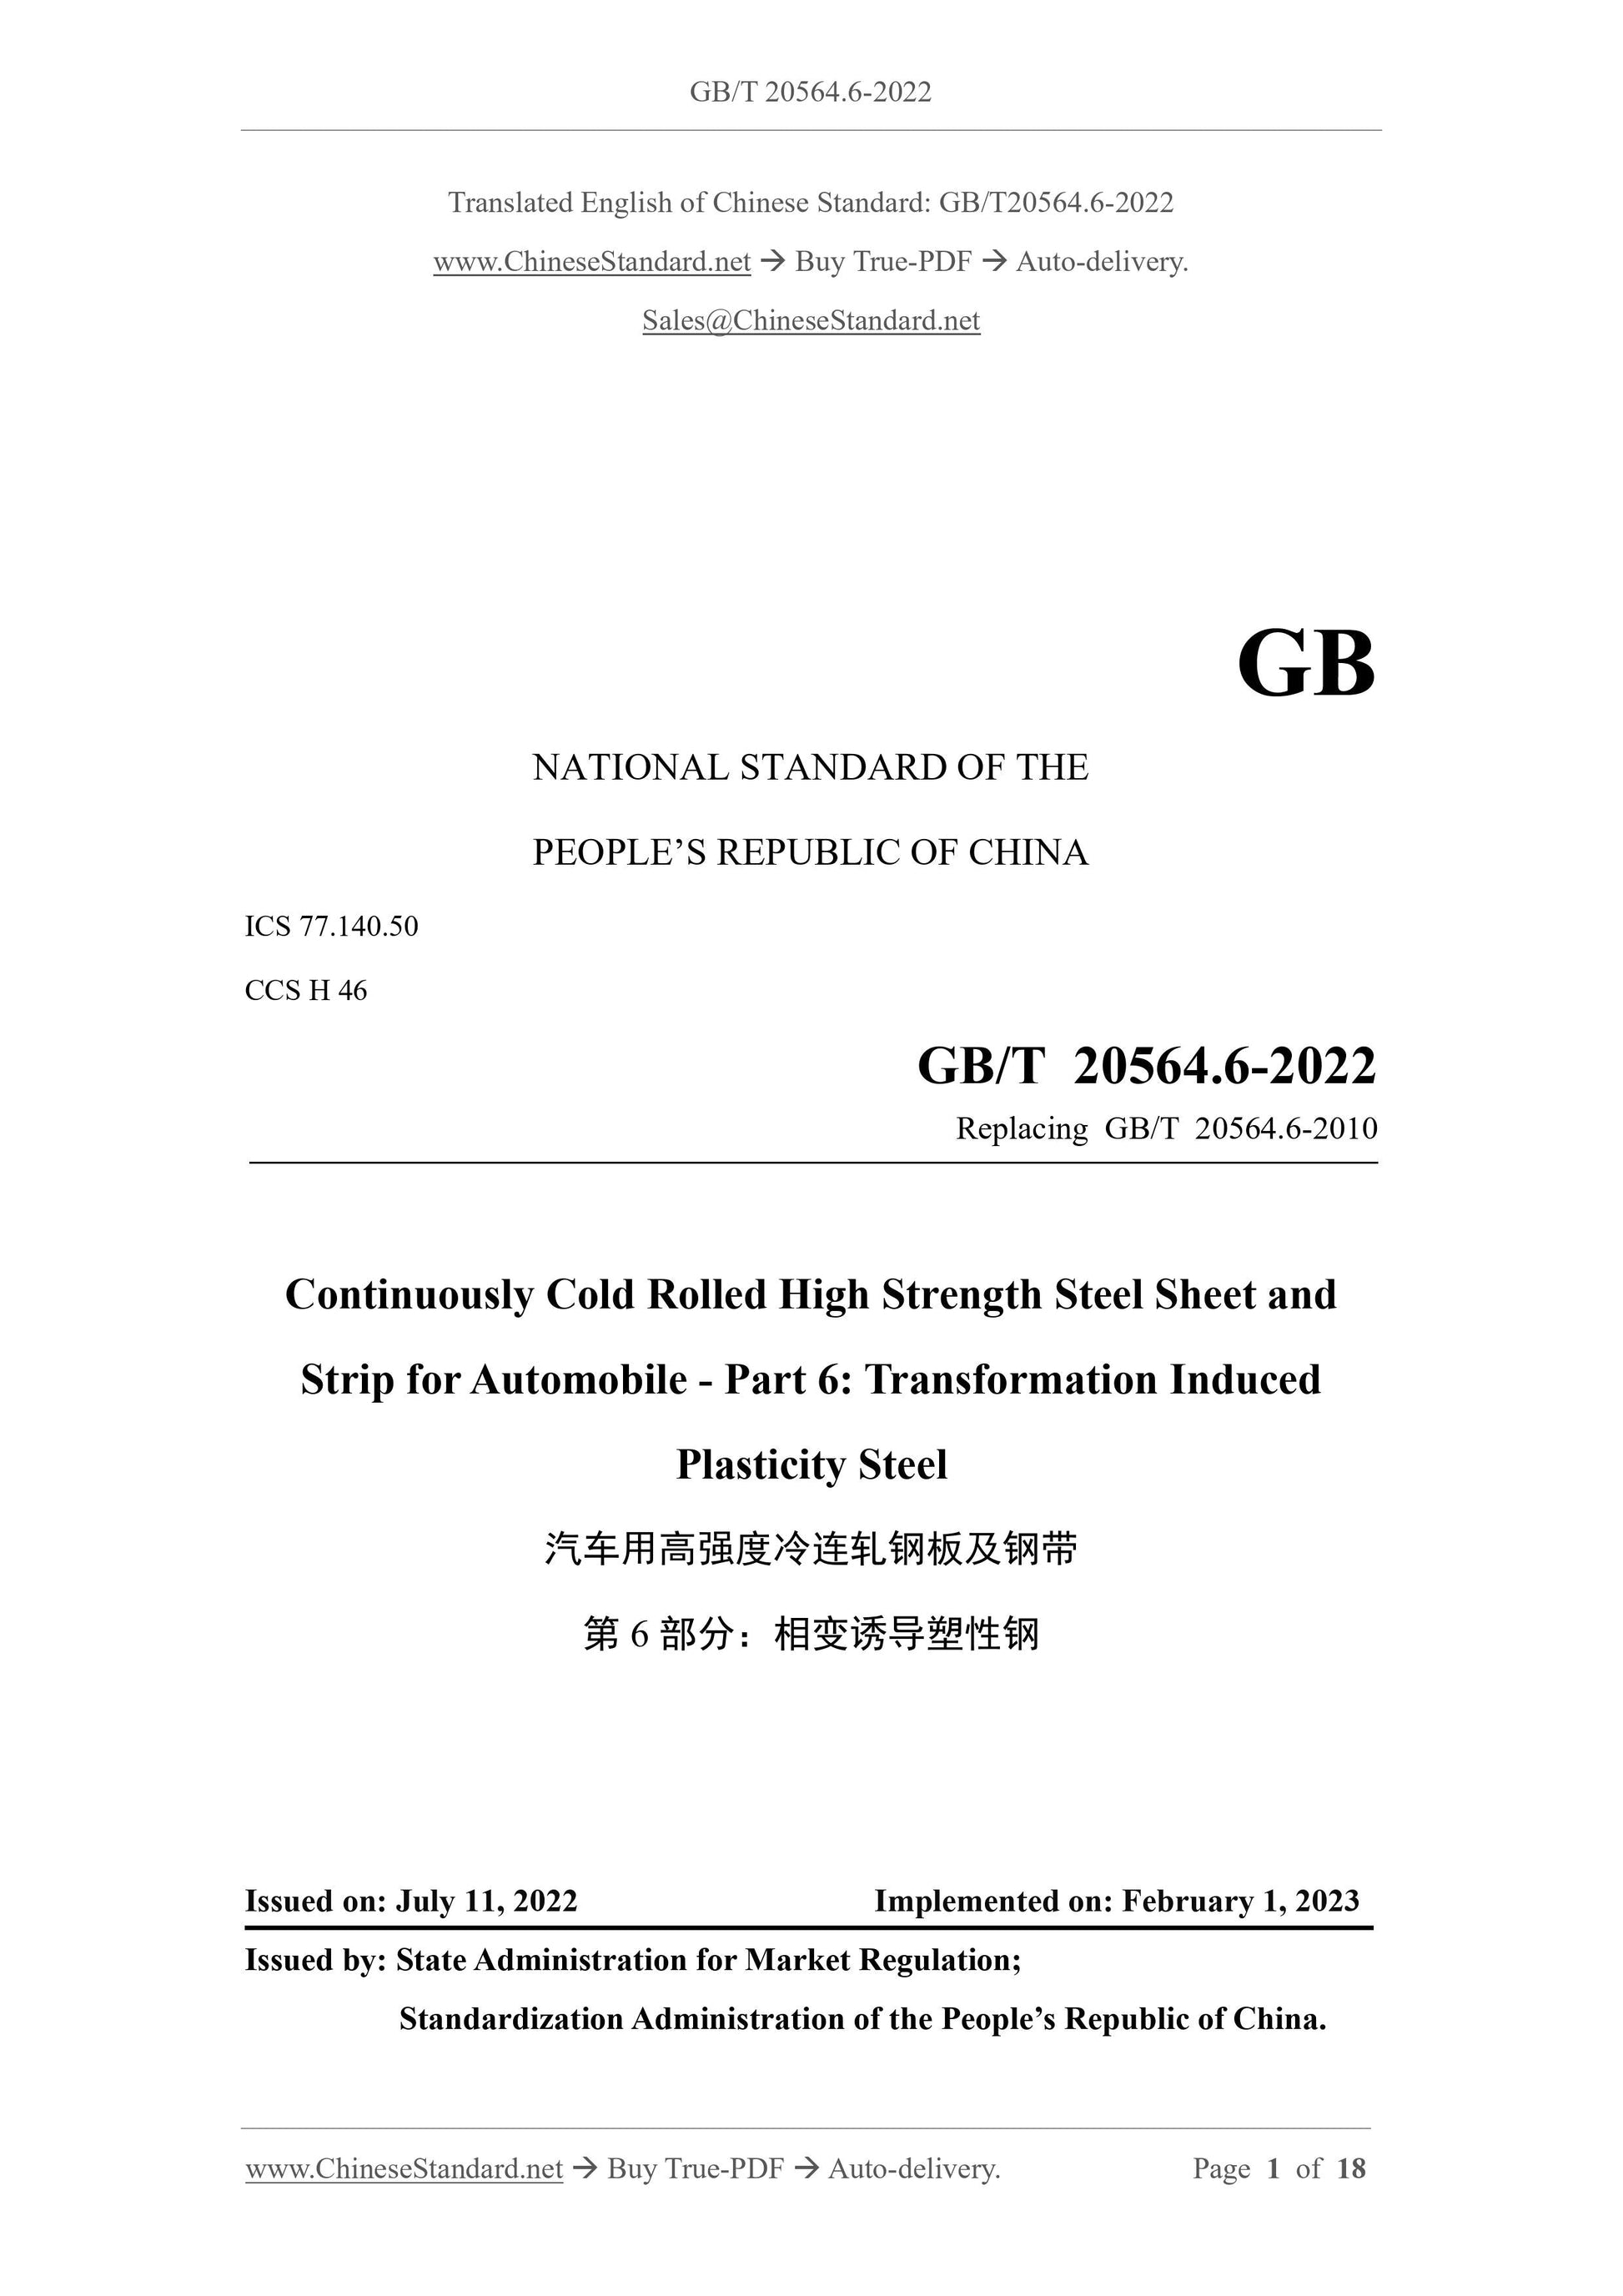 GB/T 20564.6-2022 Page 1